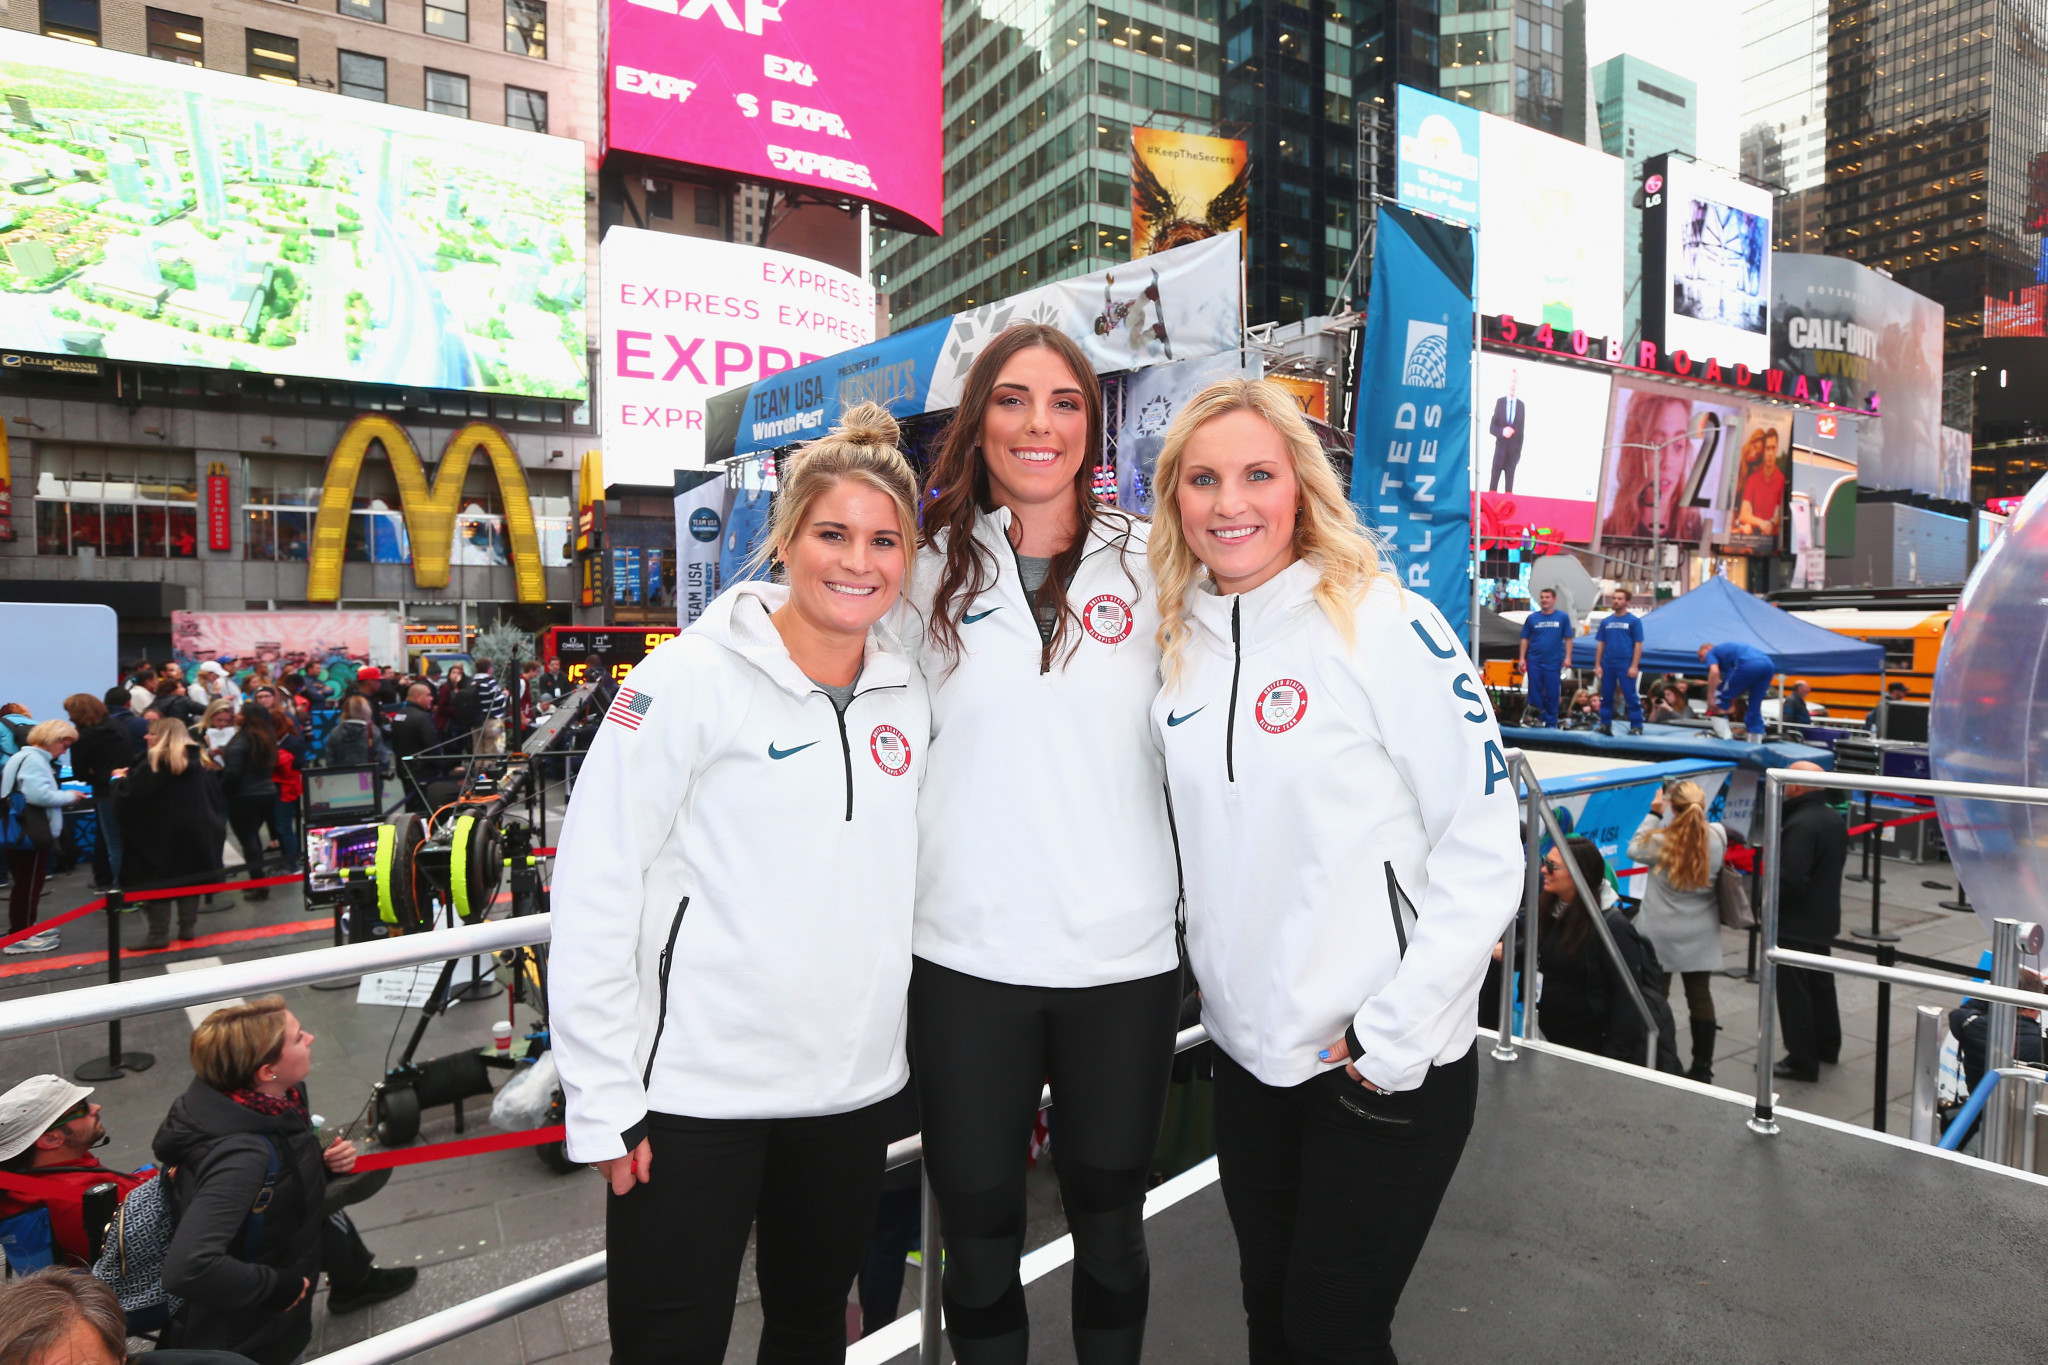 Team USA's women's ice hockey players Brianna Decker, Hilary Knight and Jocelyne Lamoureux-Davidson attend the 100 Days Out 2018 PyeongChang Winter Olympics Celebration in Times Square, New York City ©Getty Images